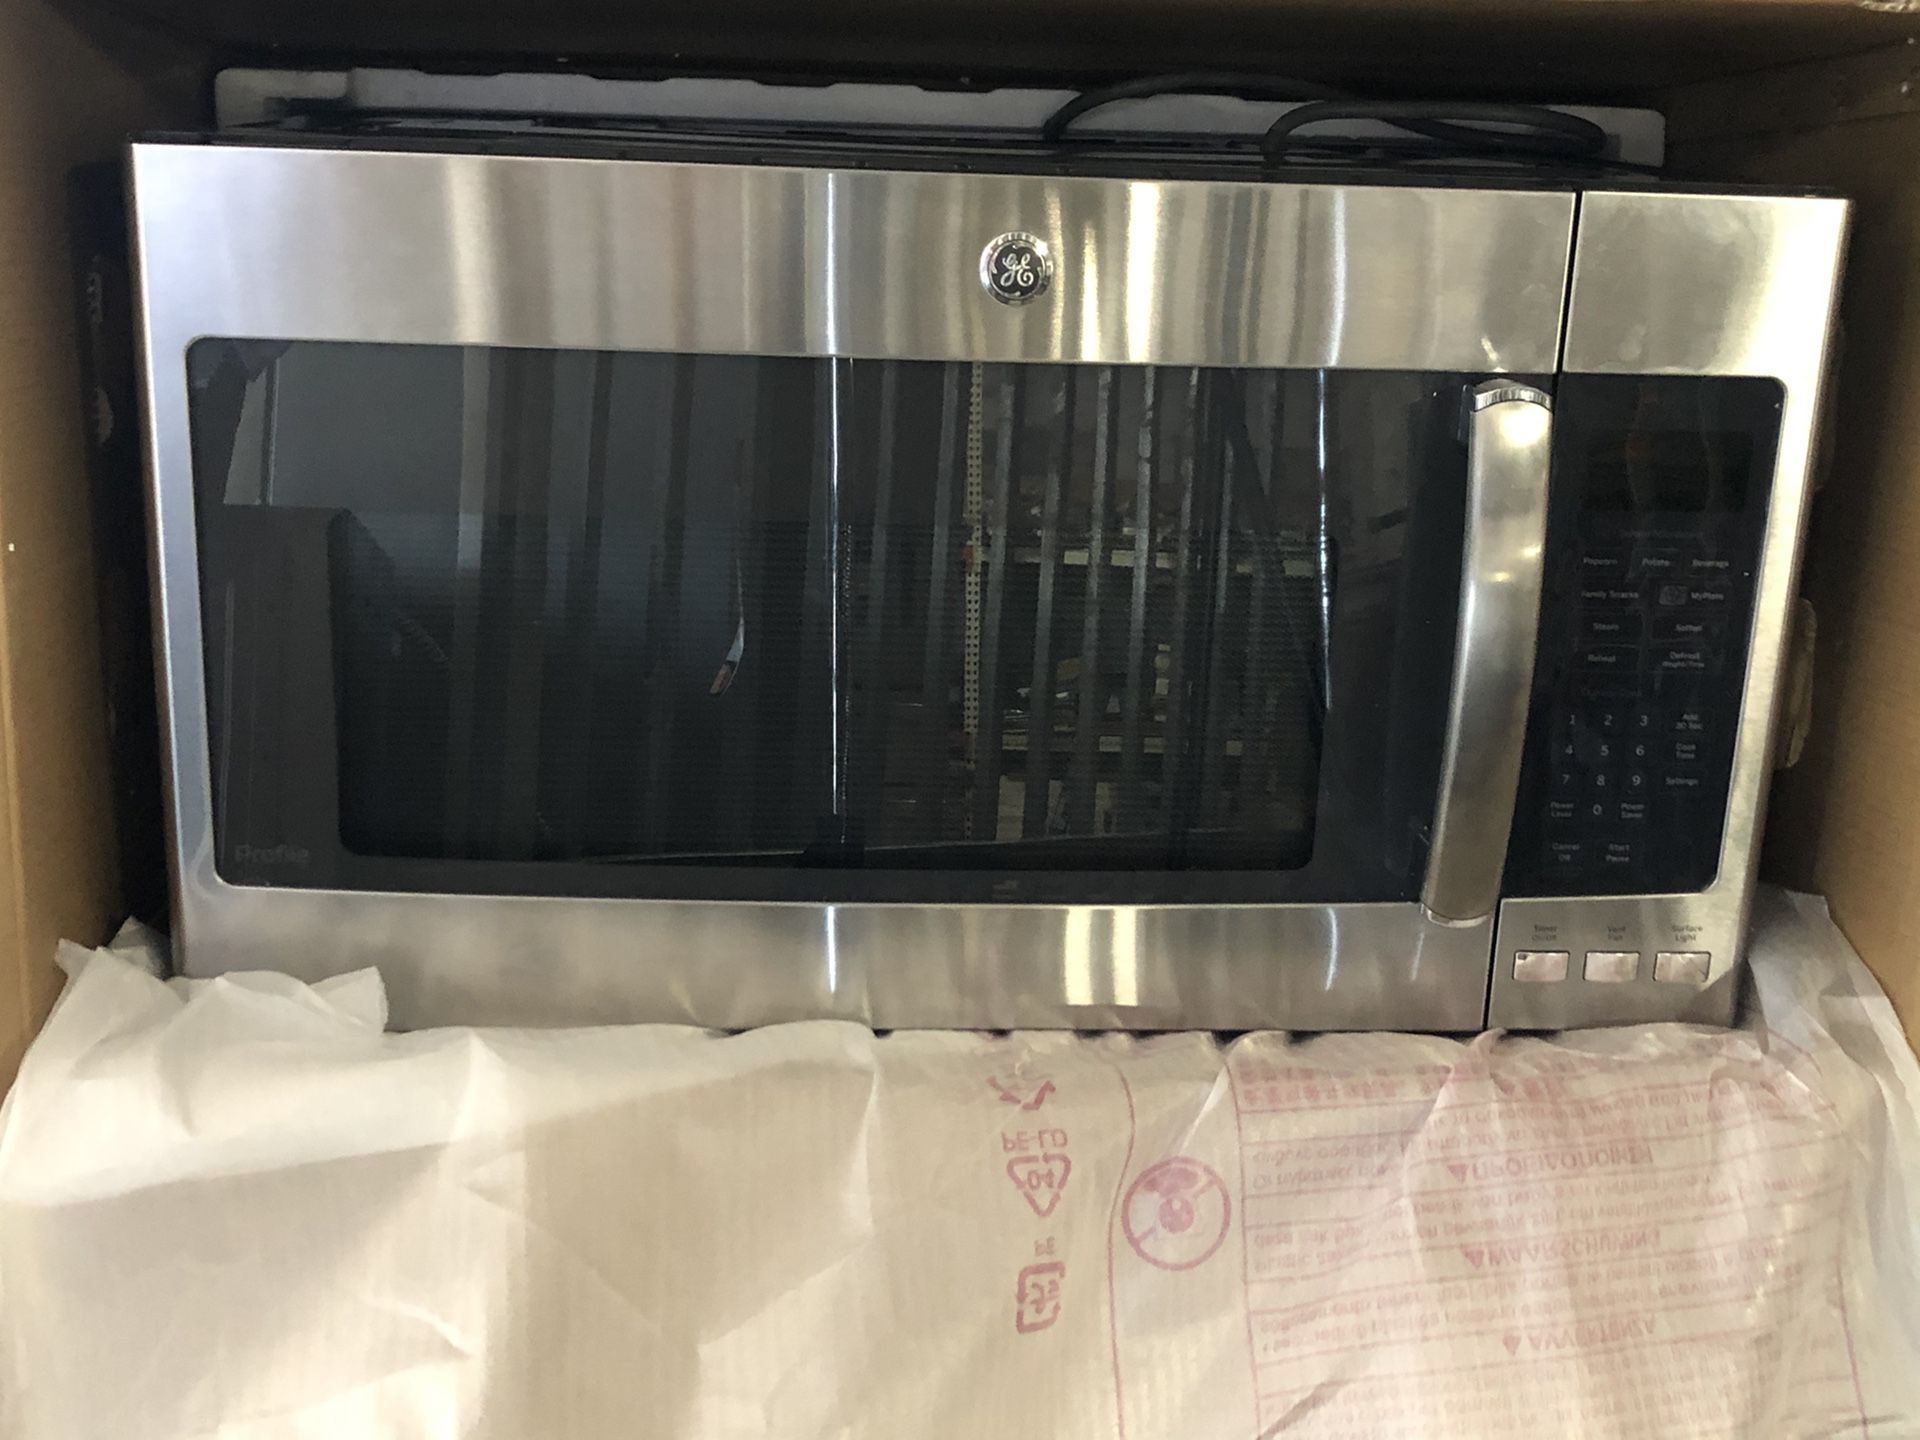 GE Profile household microwave oven model PVM9195SF3SS